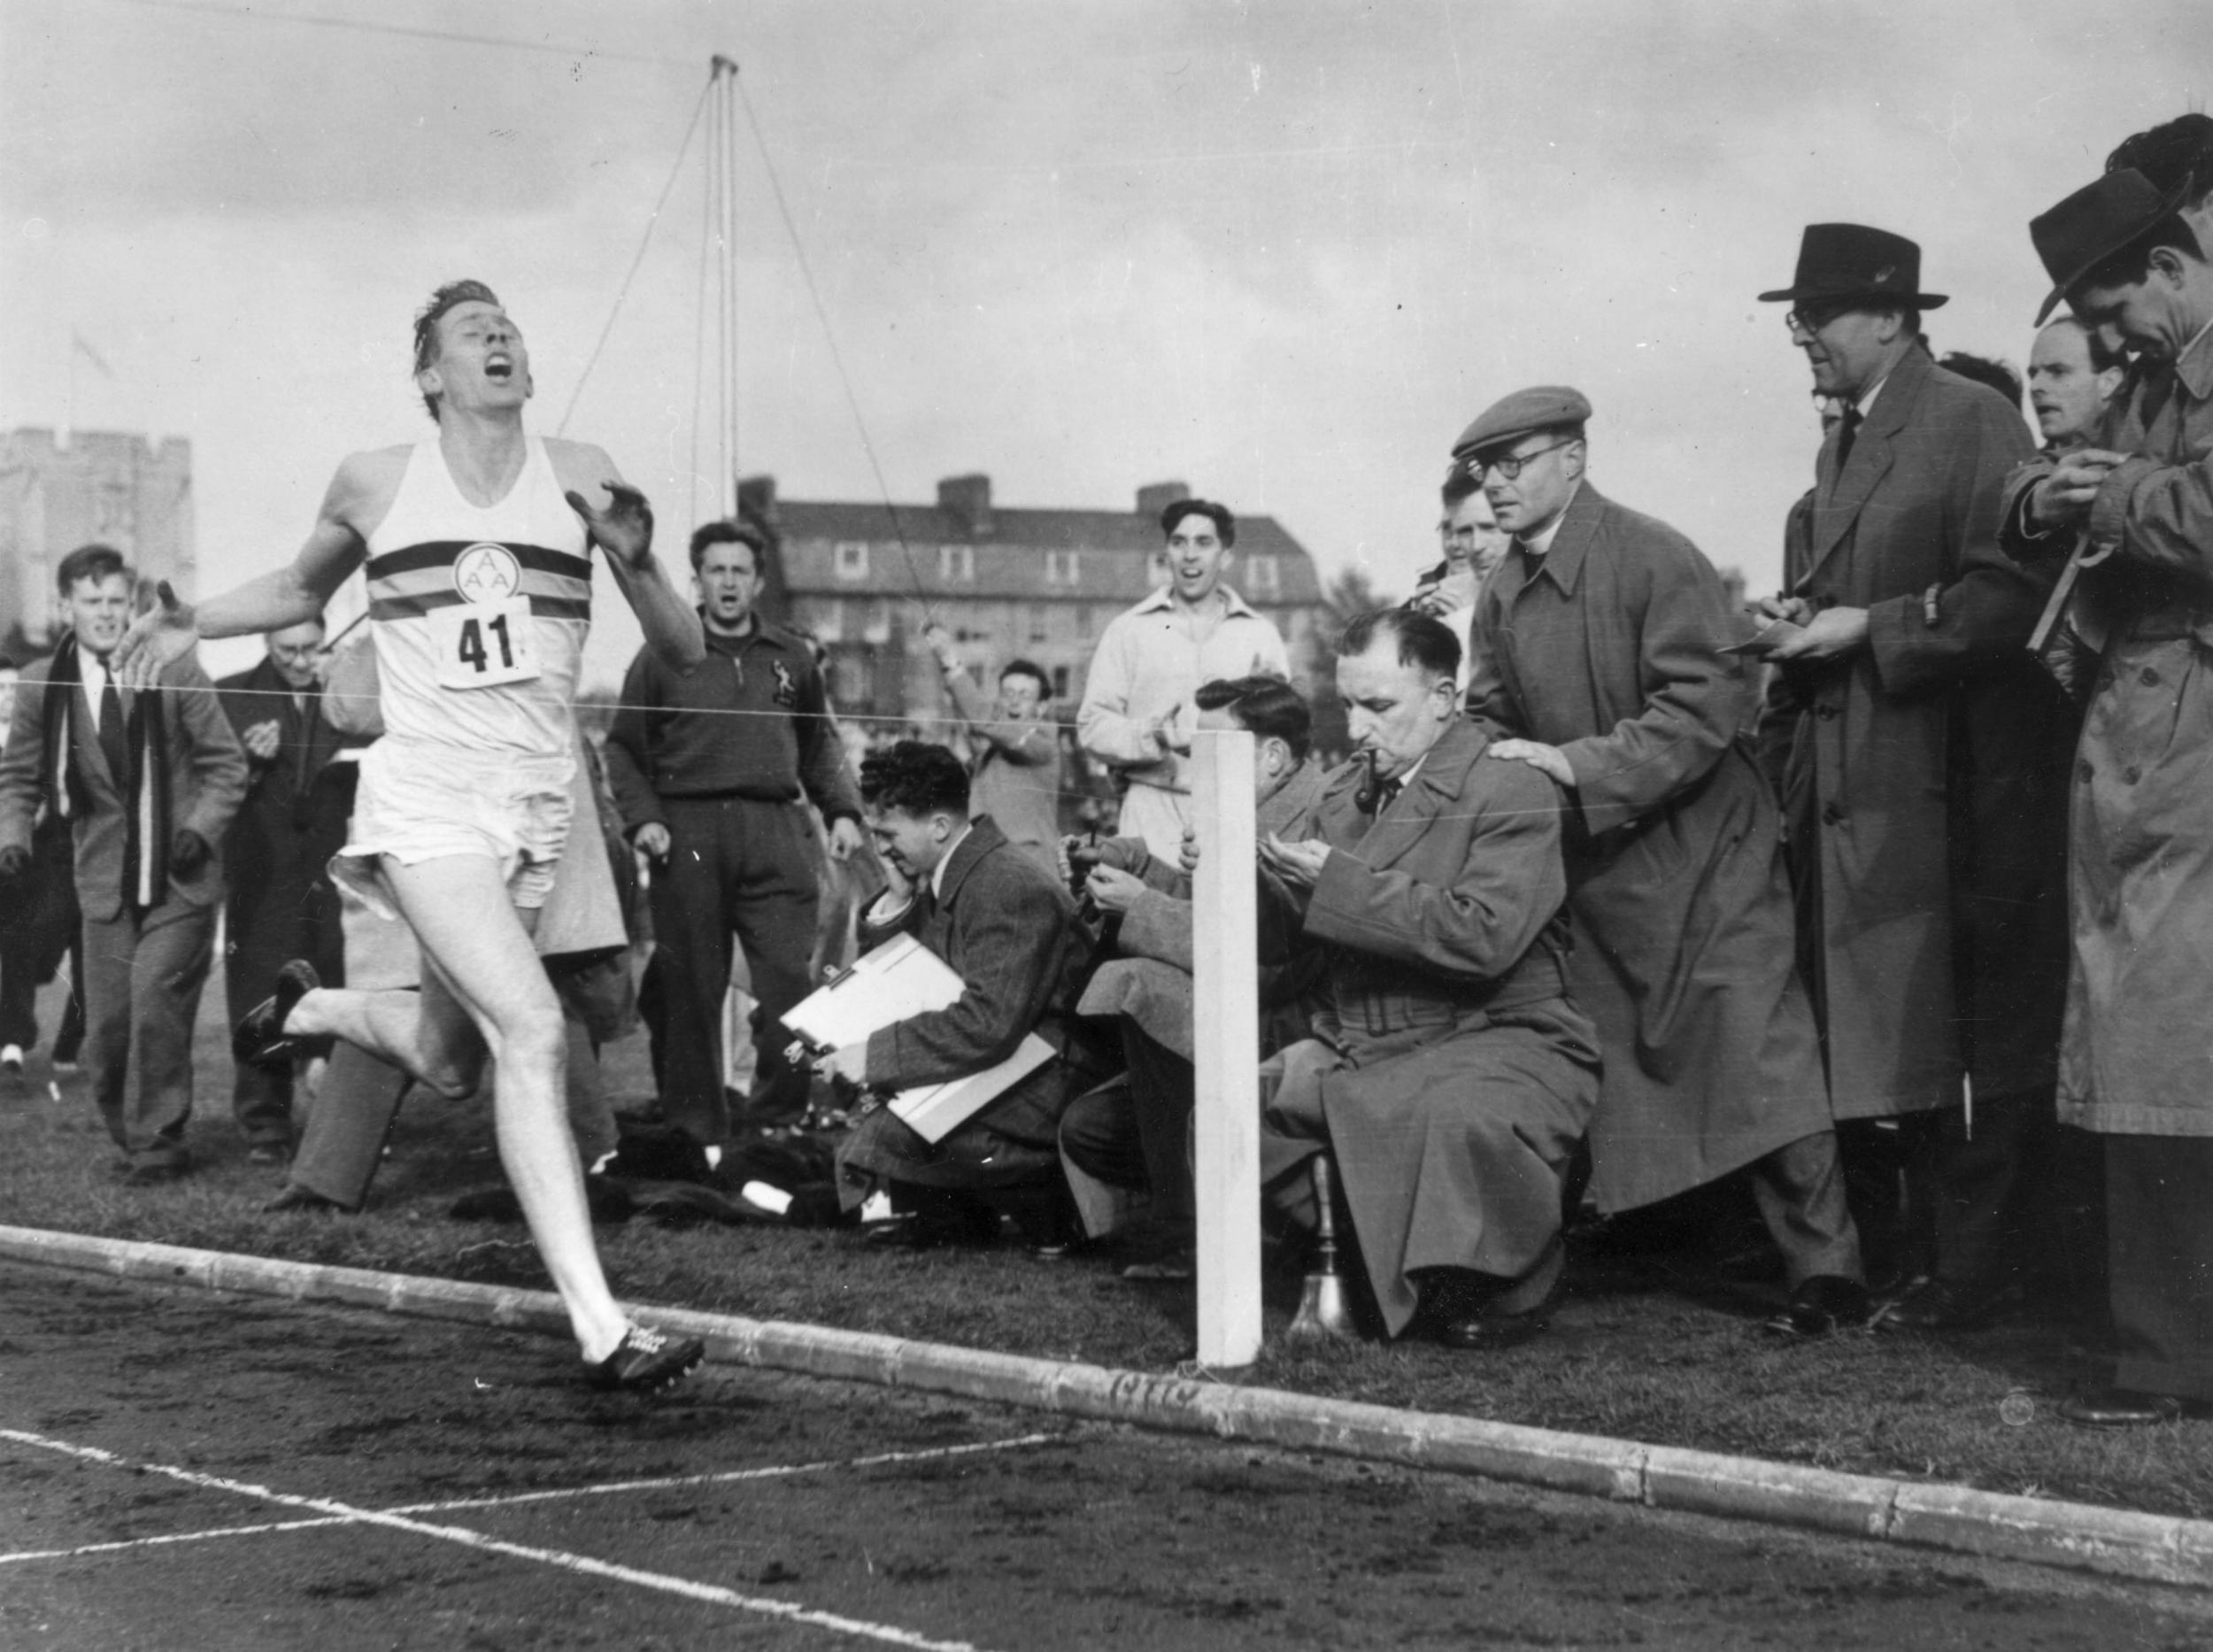 Bannister was one of the finest athletes Britain has ever had